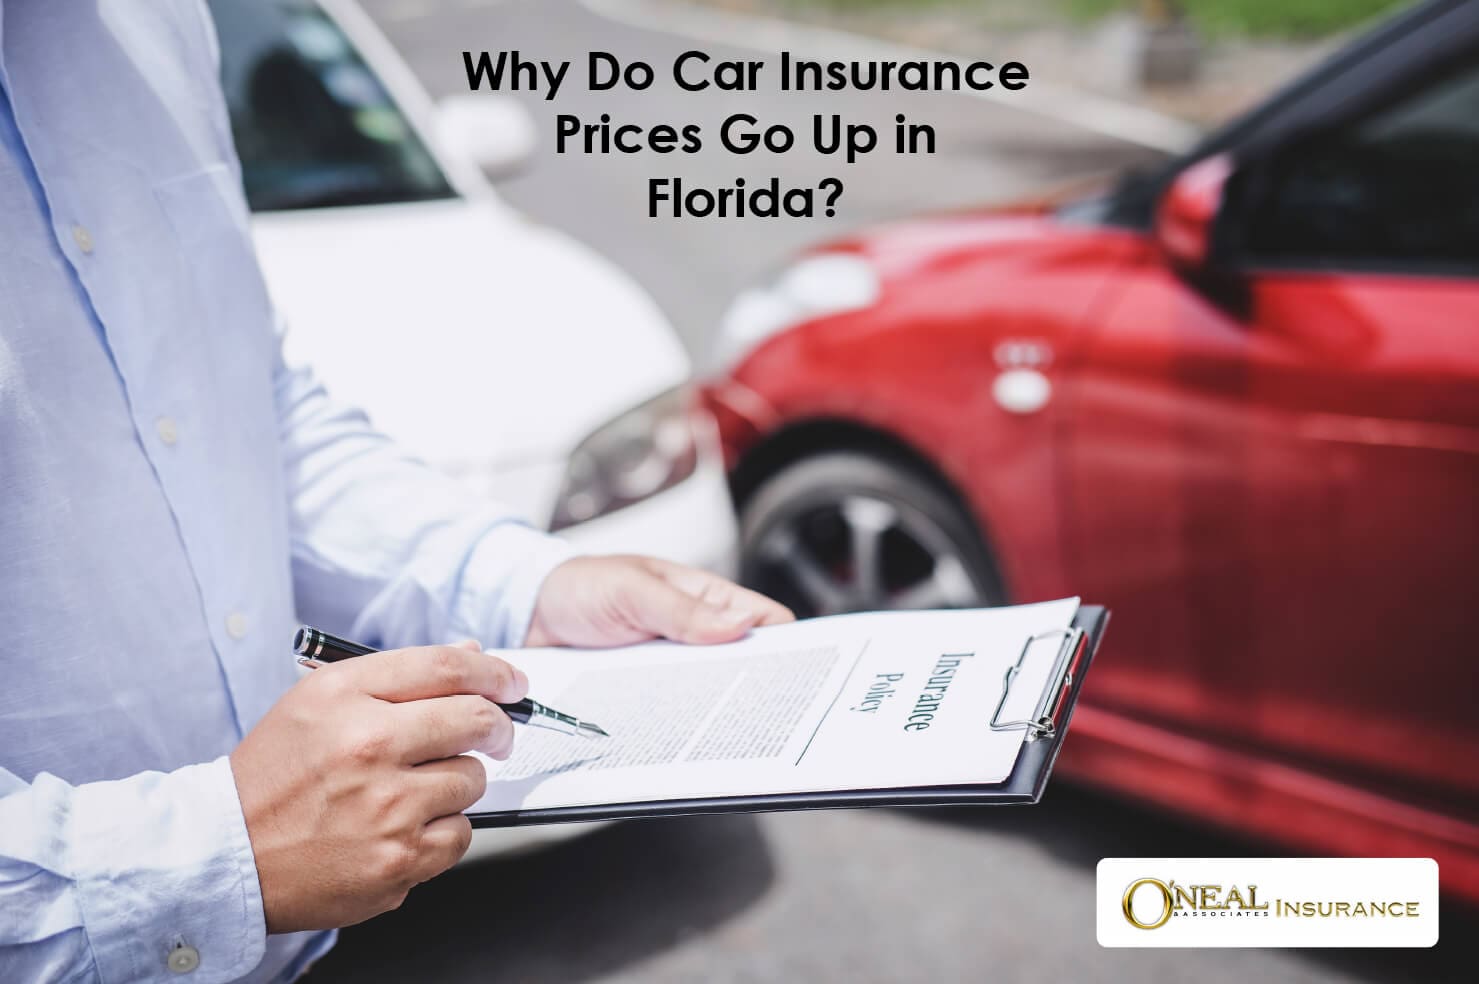 Why Do Car Insurance Prices Go Up in Florida?